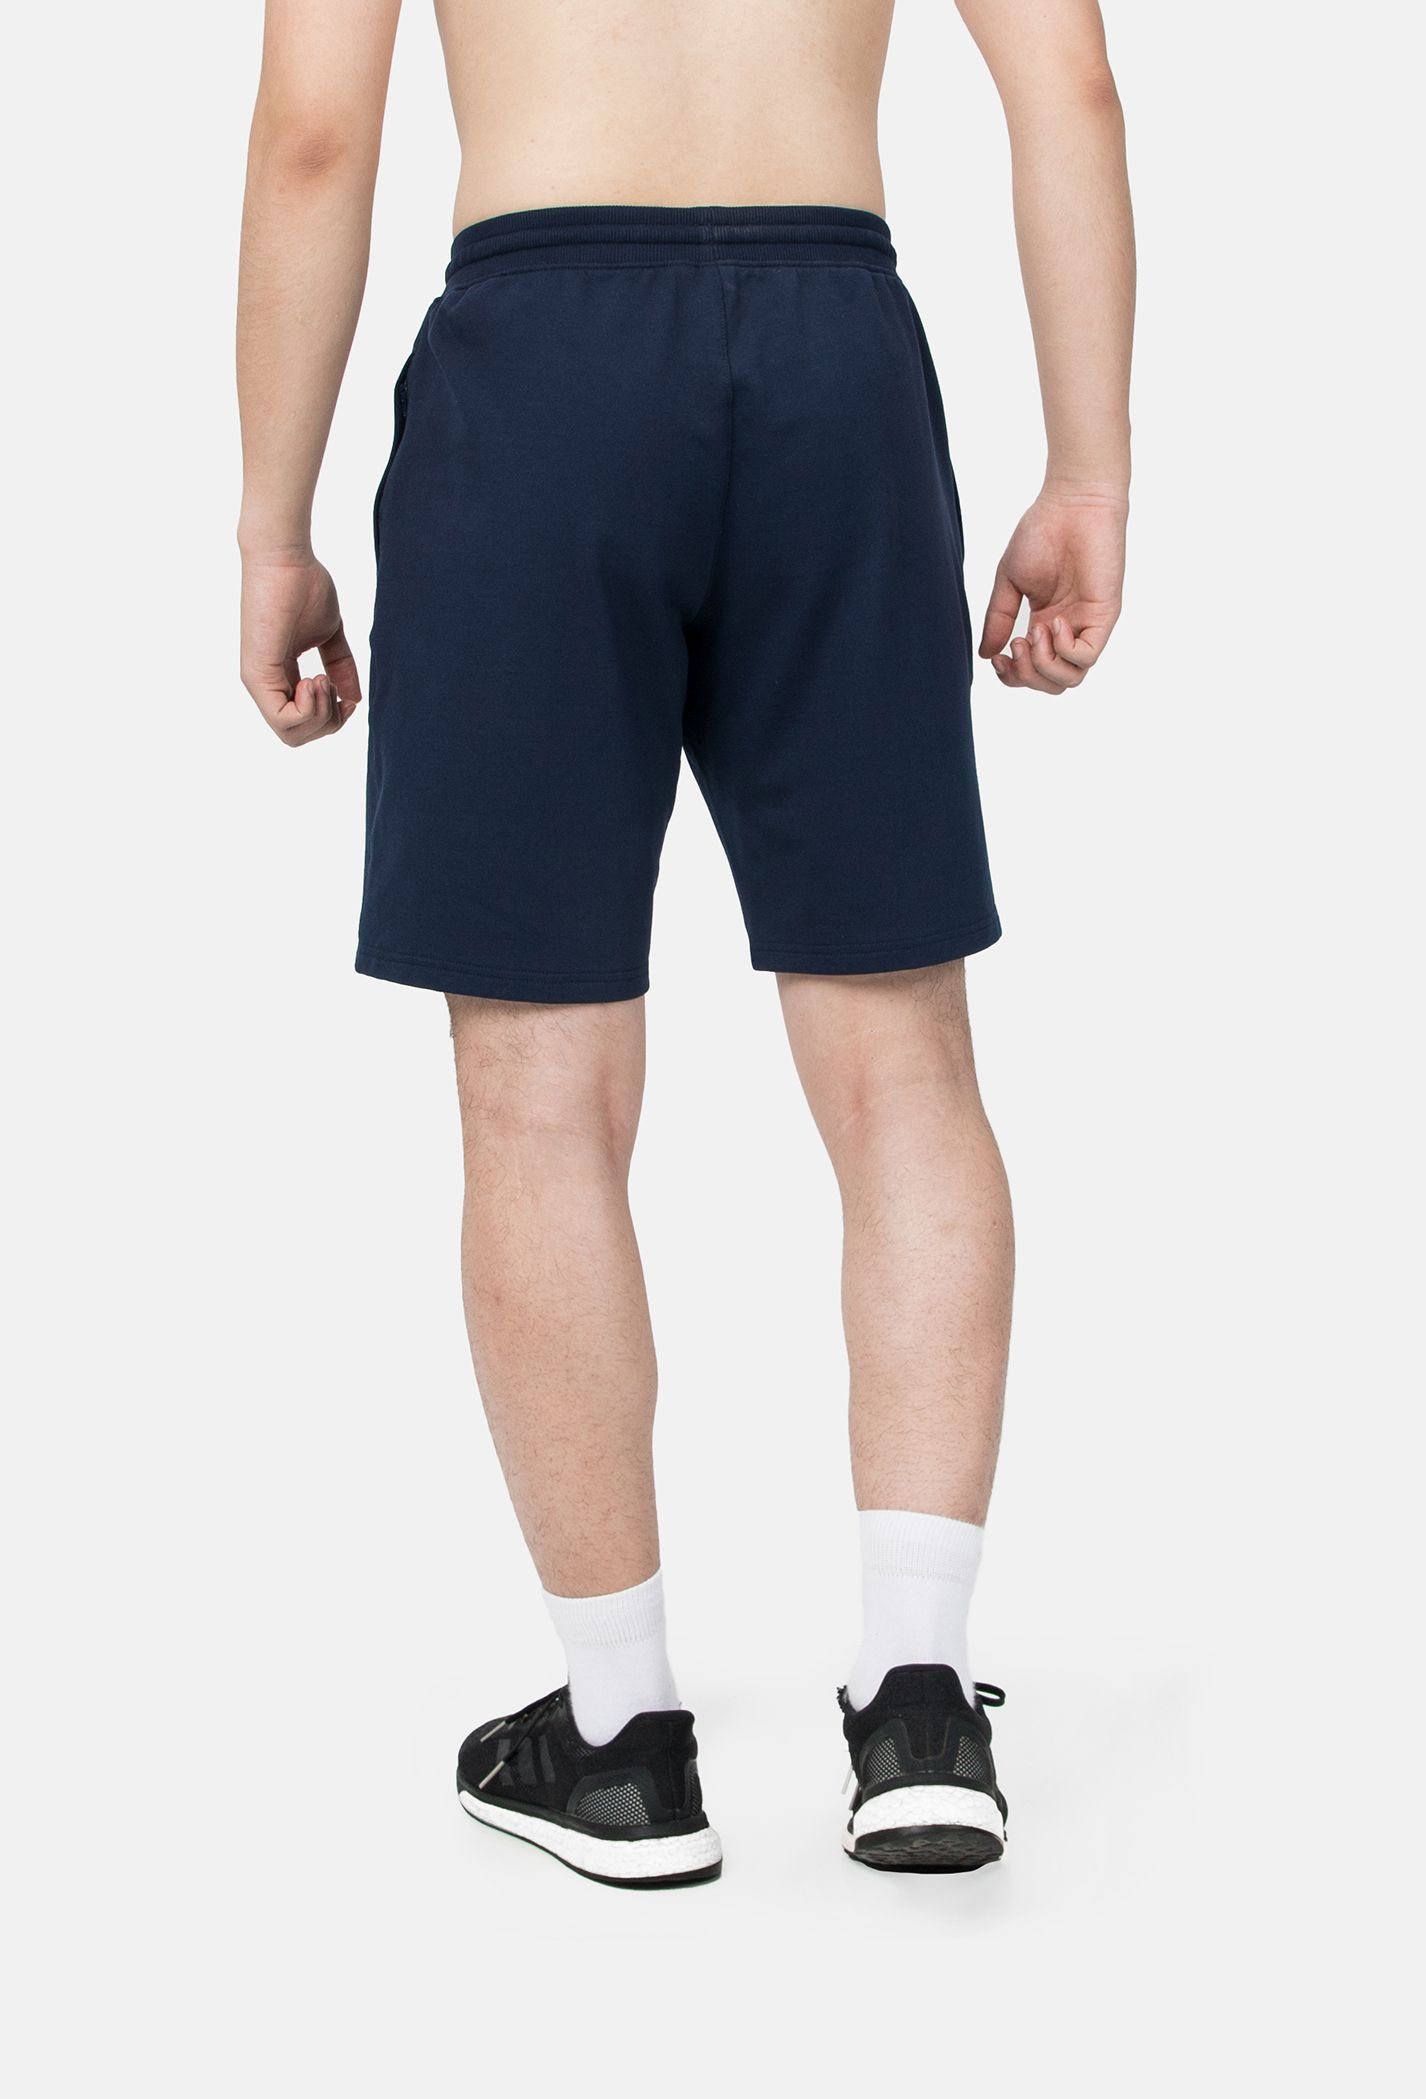 Outlet - Quần Short Nam New French Terry Xanh Navy 2